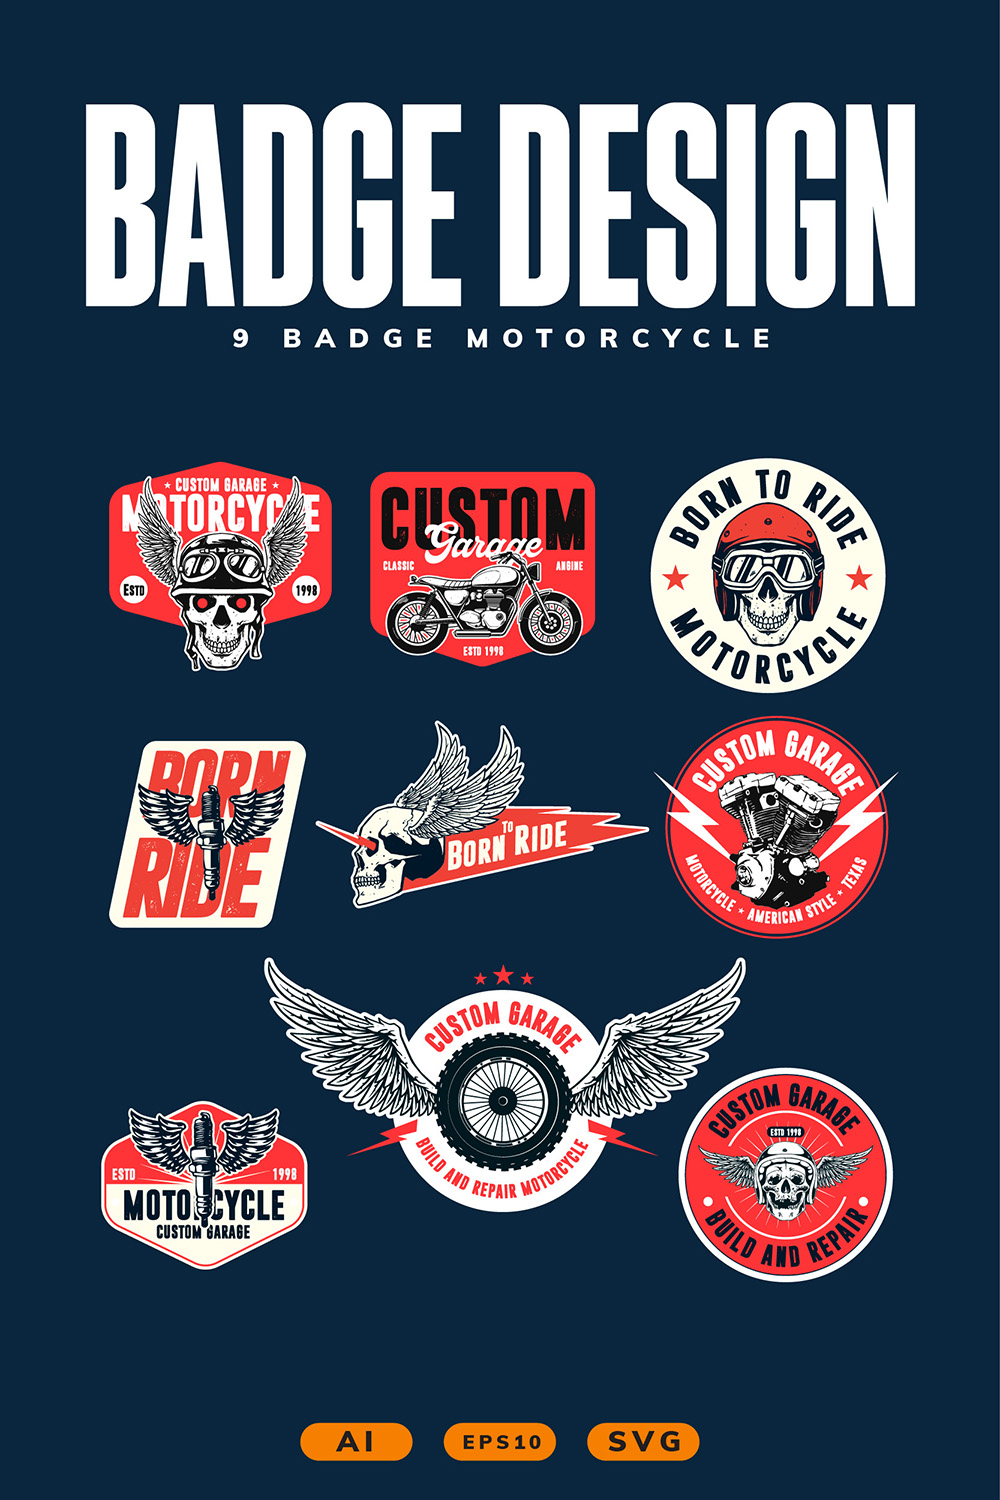 9 badge motorcycle design pinterest preview image.